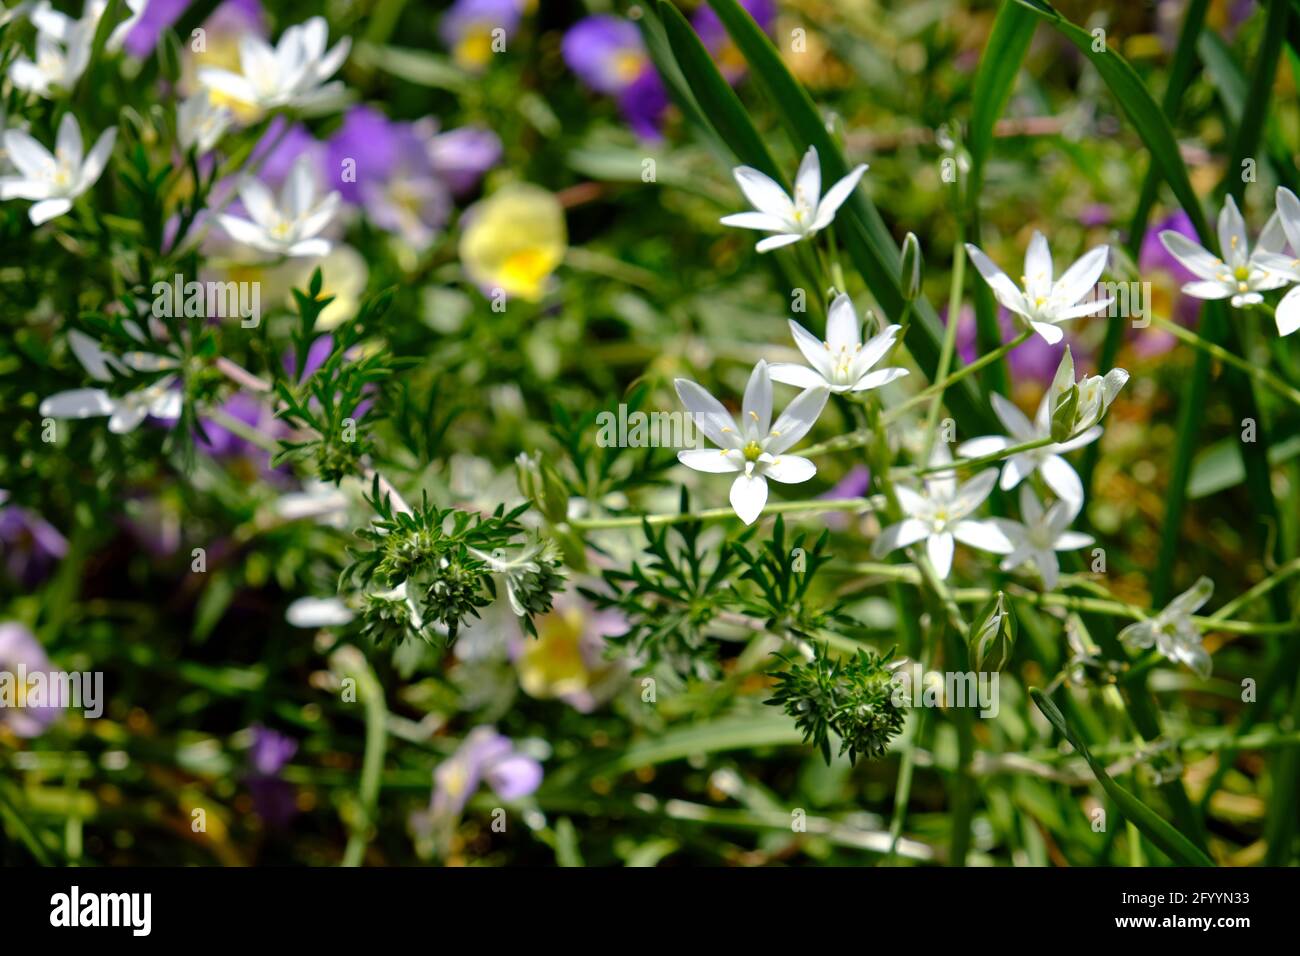 Beautiful and delicate plain white Star of Bethlehem (Ornithogalum divergens) flowers in a Glebe garden in Ottawa, Ontario, Canada. Stock Photo